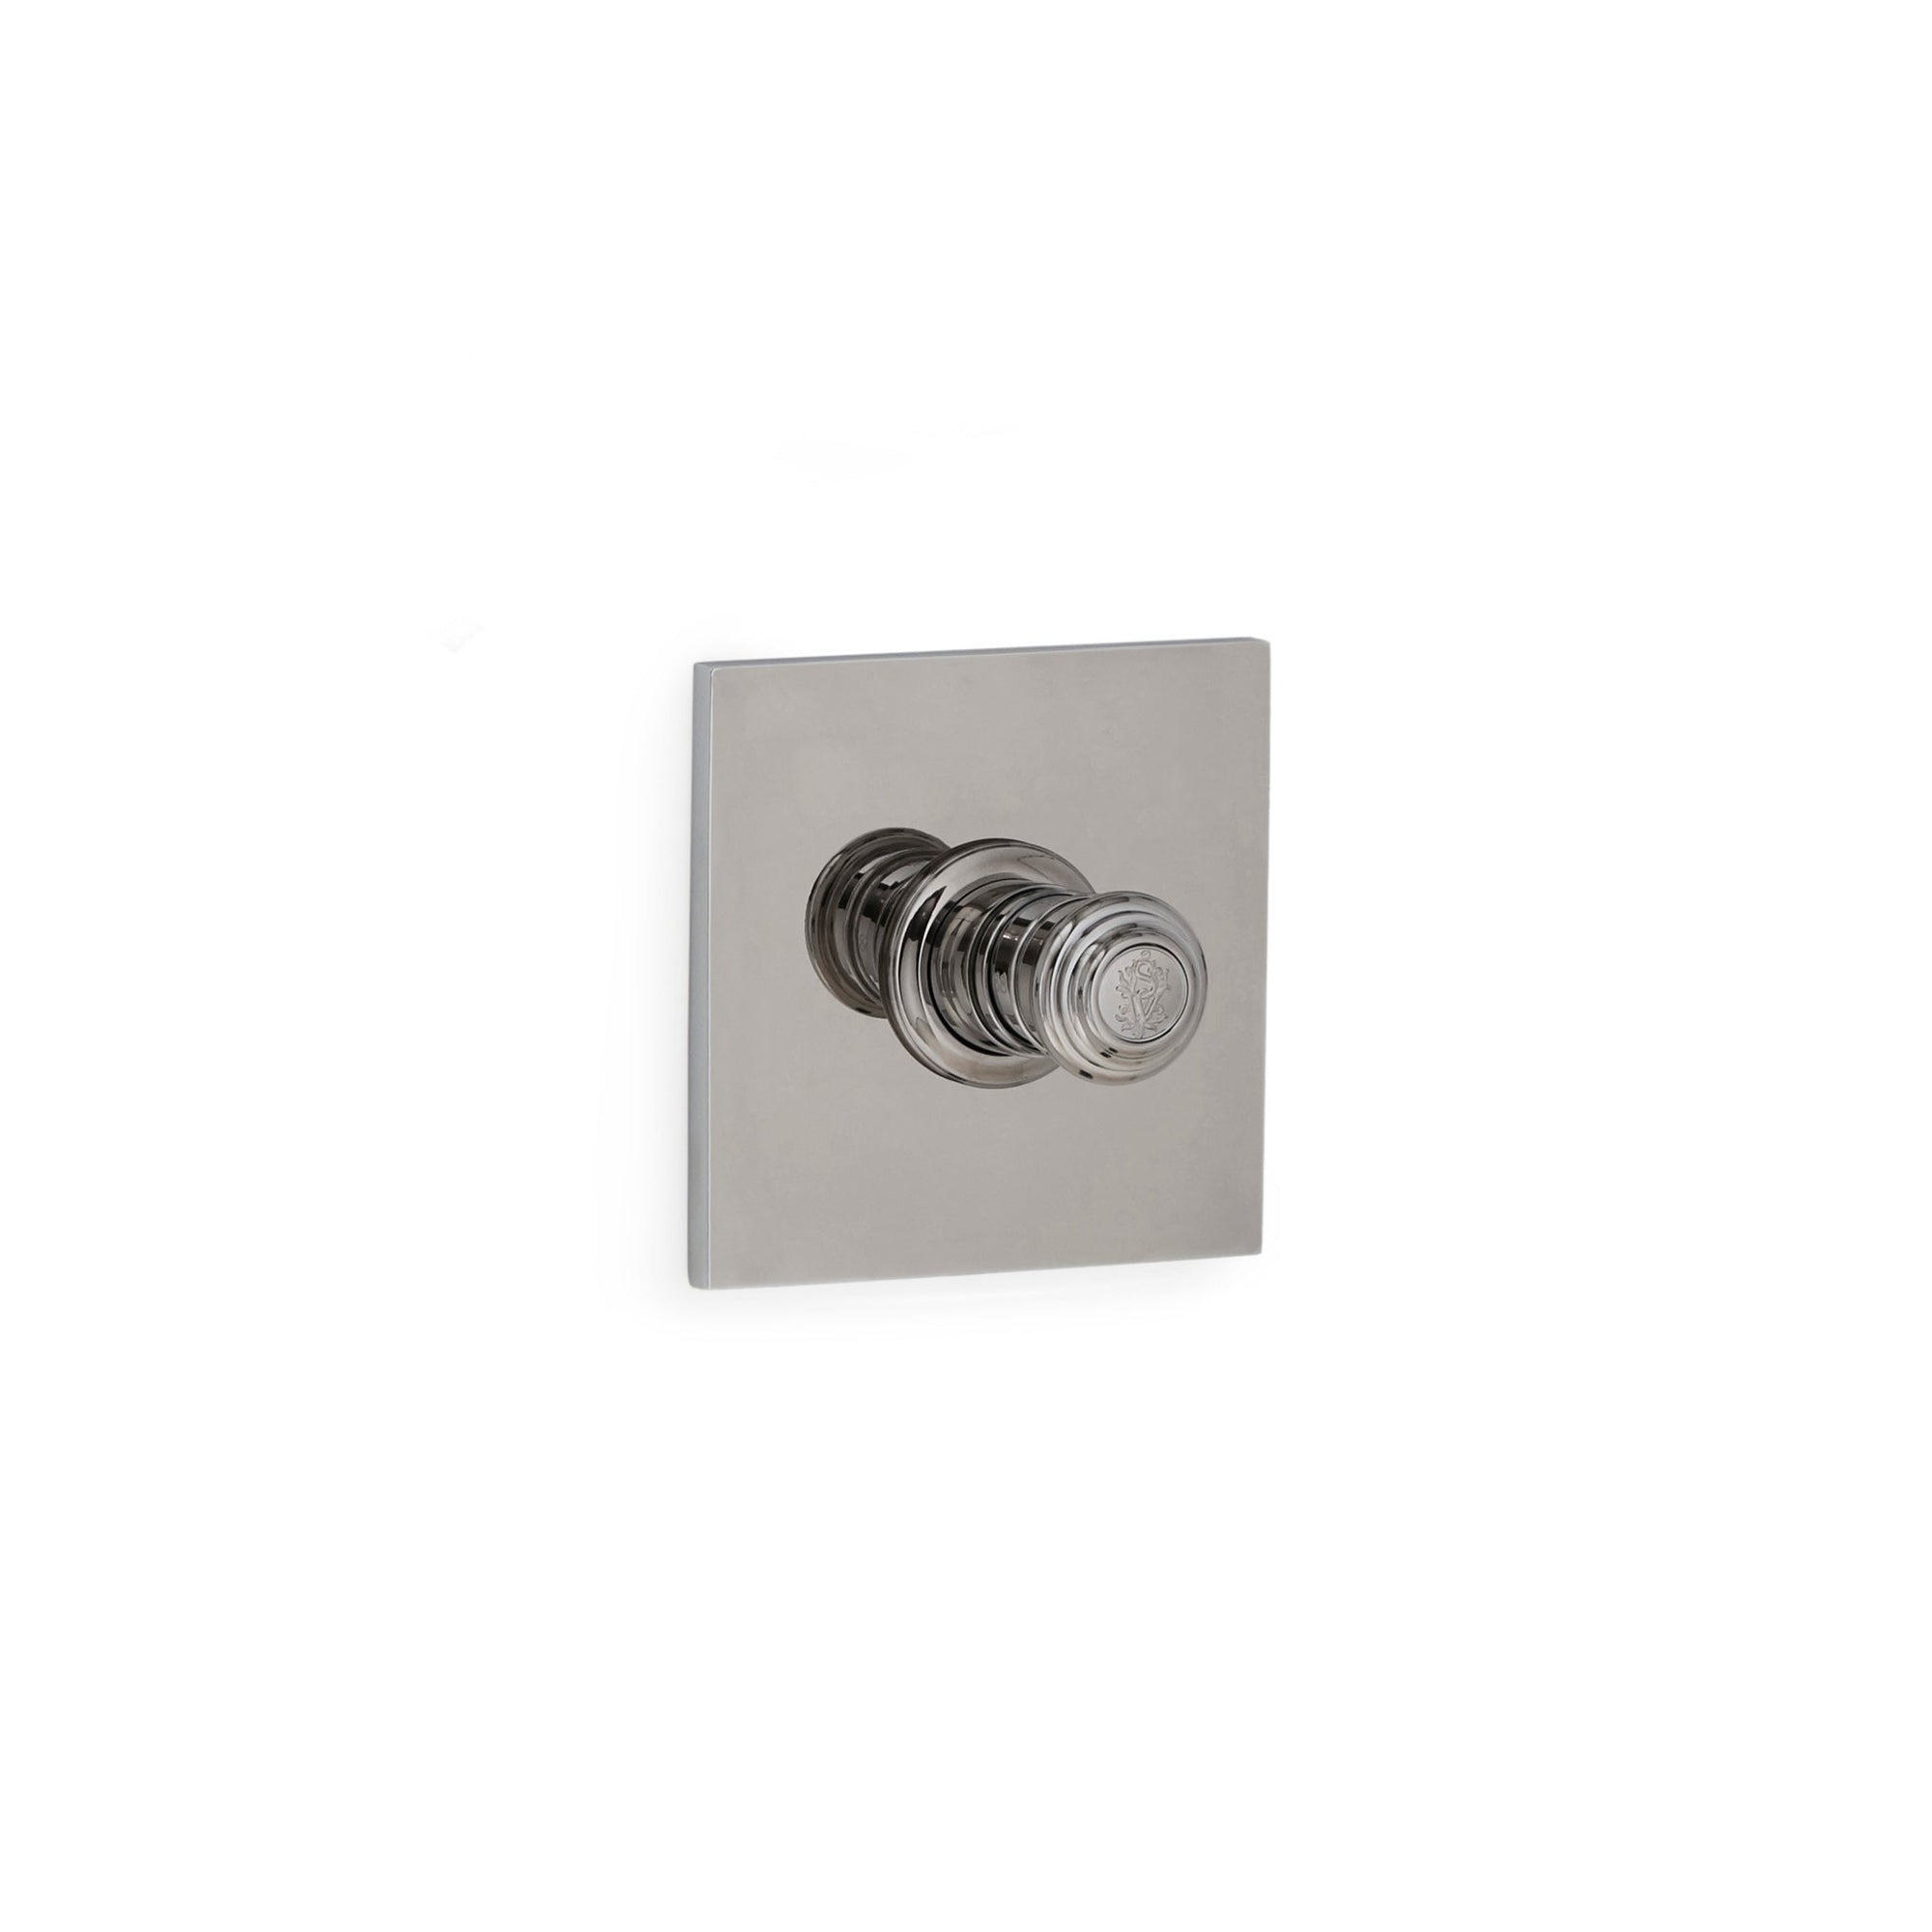 TMO09PL-LOGO-CP Sherle Wagner International Modern Square High Flow Thermostatic Trim in Polished Chrome metal finish